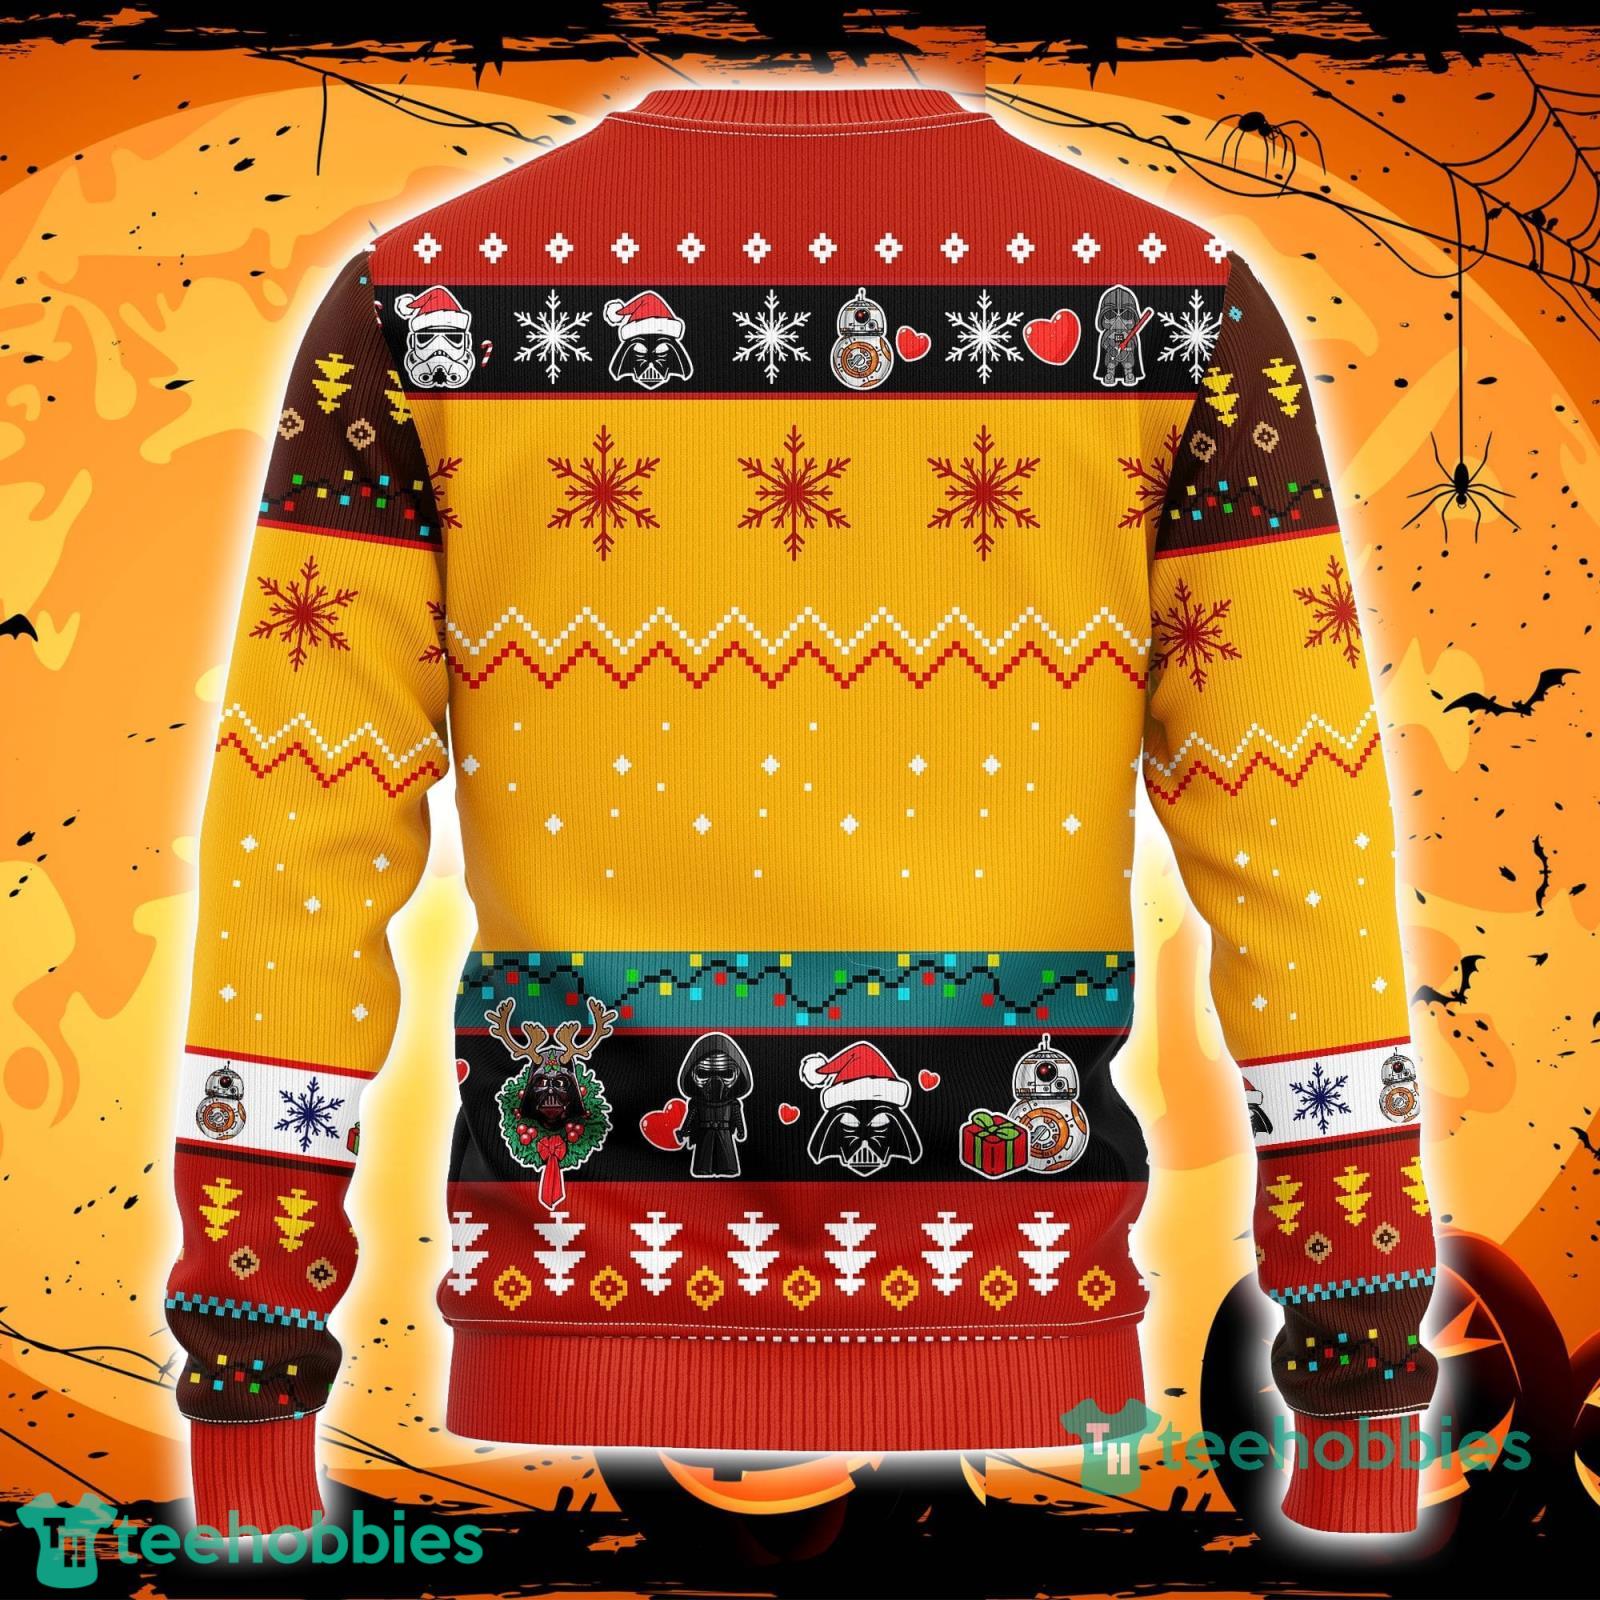 https://image.teehobbies.us/2023/08/darth-vader-cute-ugly-christmas-sweater-yellow-1-amazing-gift-men-and-women-cute-christmas-gift-1.jpg